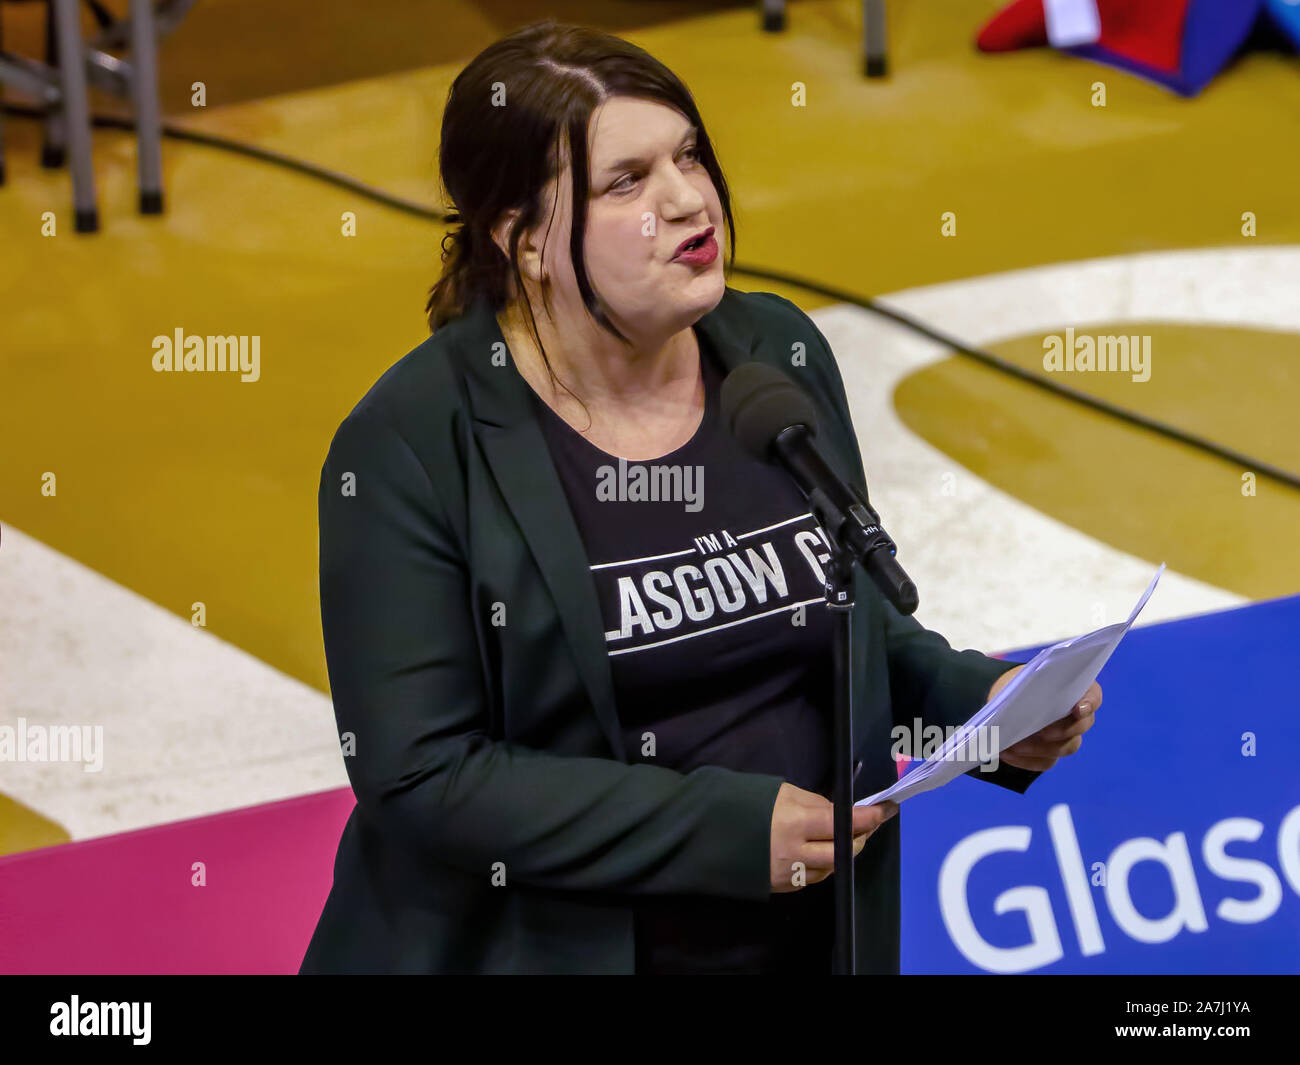 Glasgow, Scotland, UK. 1st March, 2019. Leader of Glasgow City Council, Councillor Susan Aitken, speaking at the opening of the Glasgow 2019 European Athletics Indoor Championships, at the Emirates Arena. Iain McGuinness / Alamy Live News Stock Photo